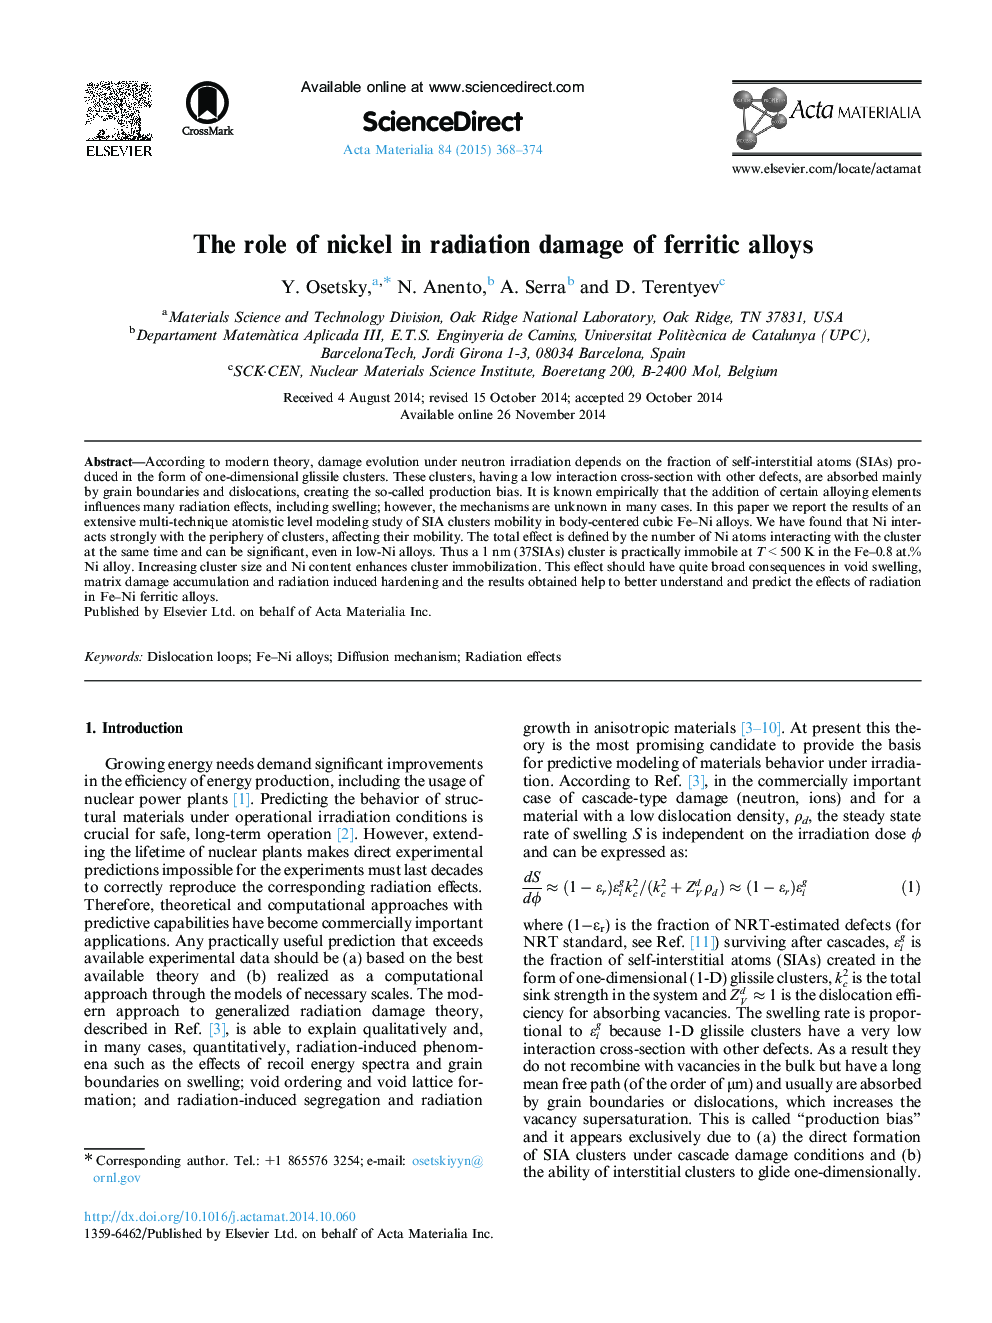 The role of nickel in radiation damage of ferritic alloys